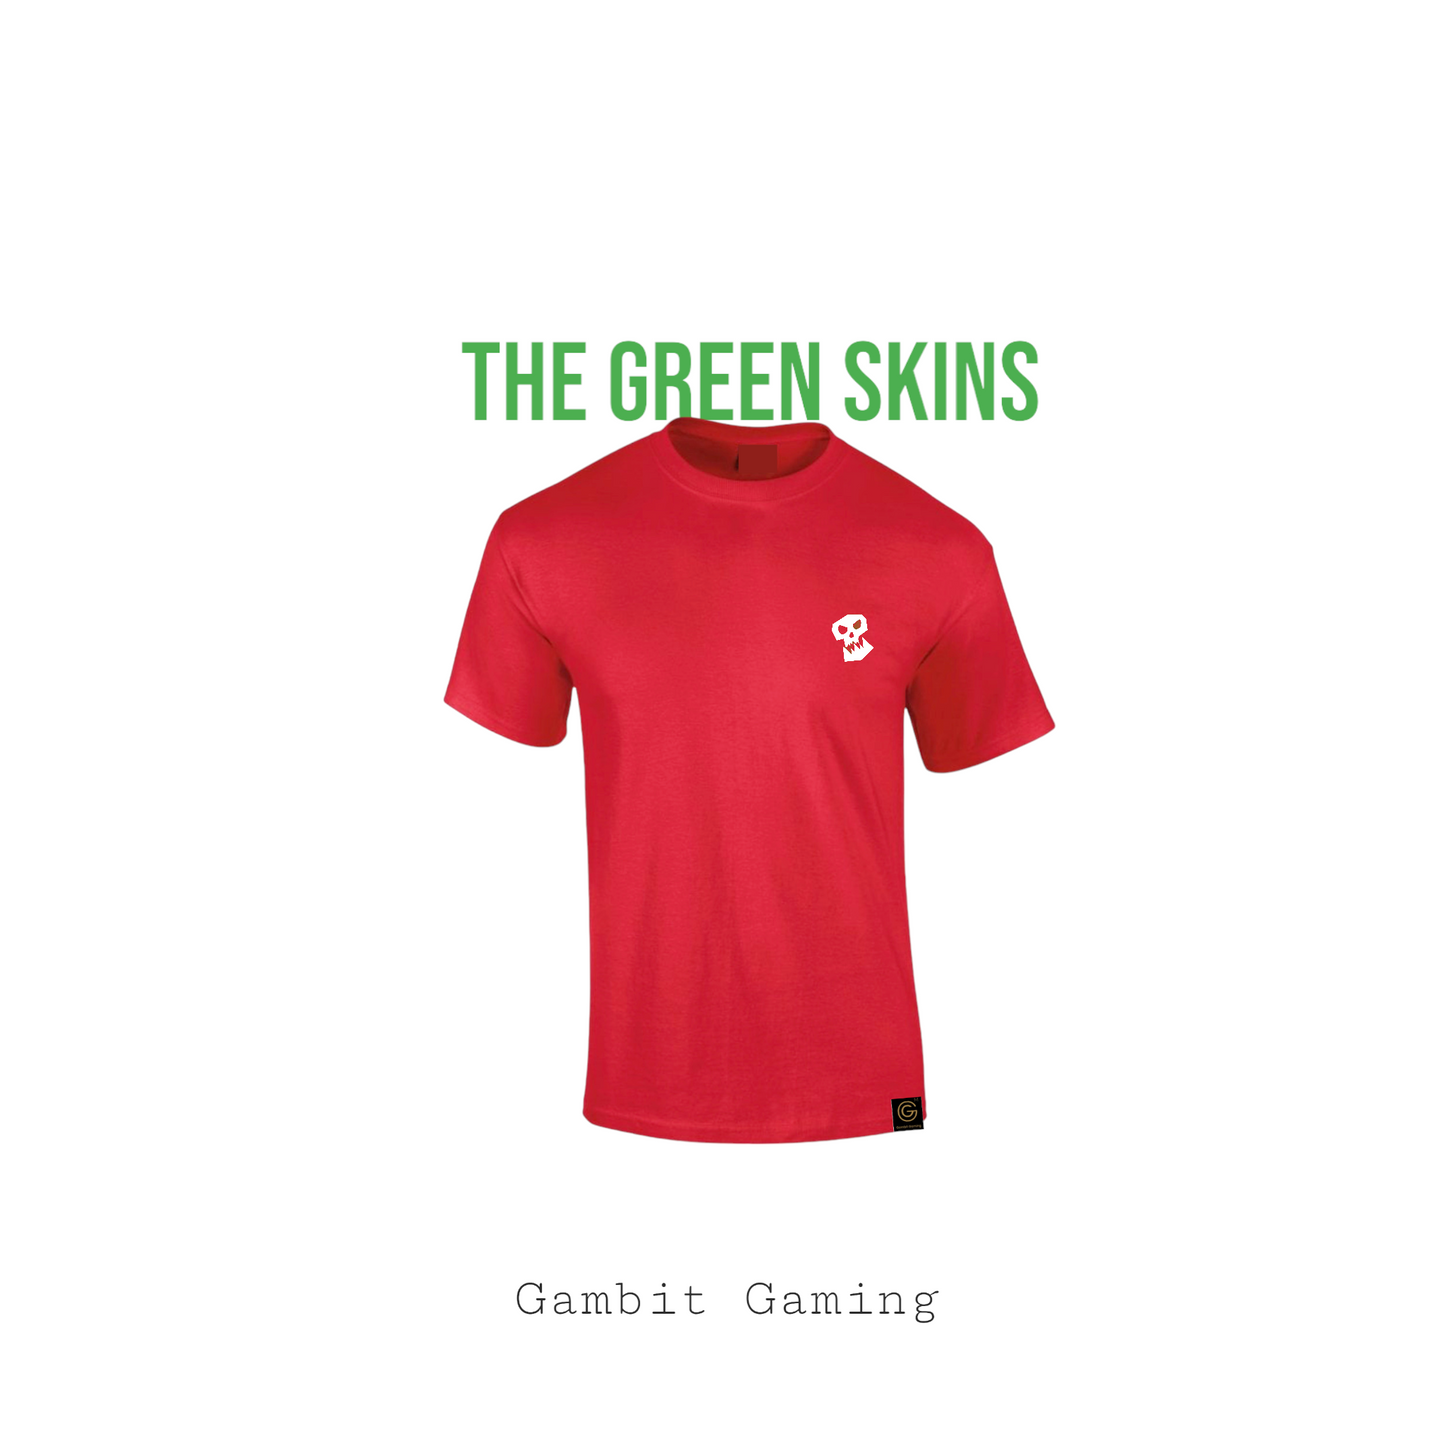 The Green Skins